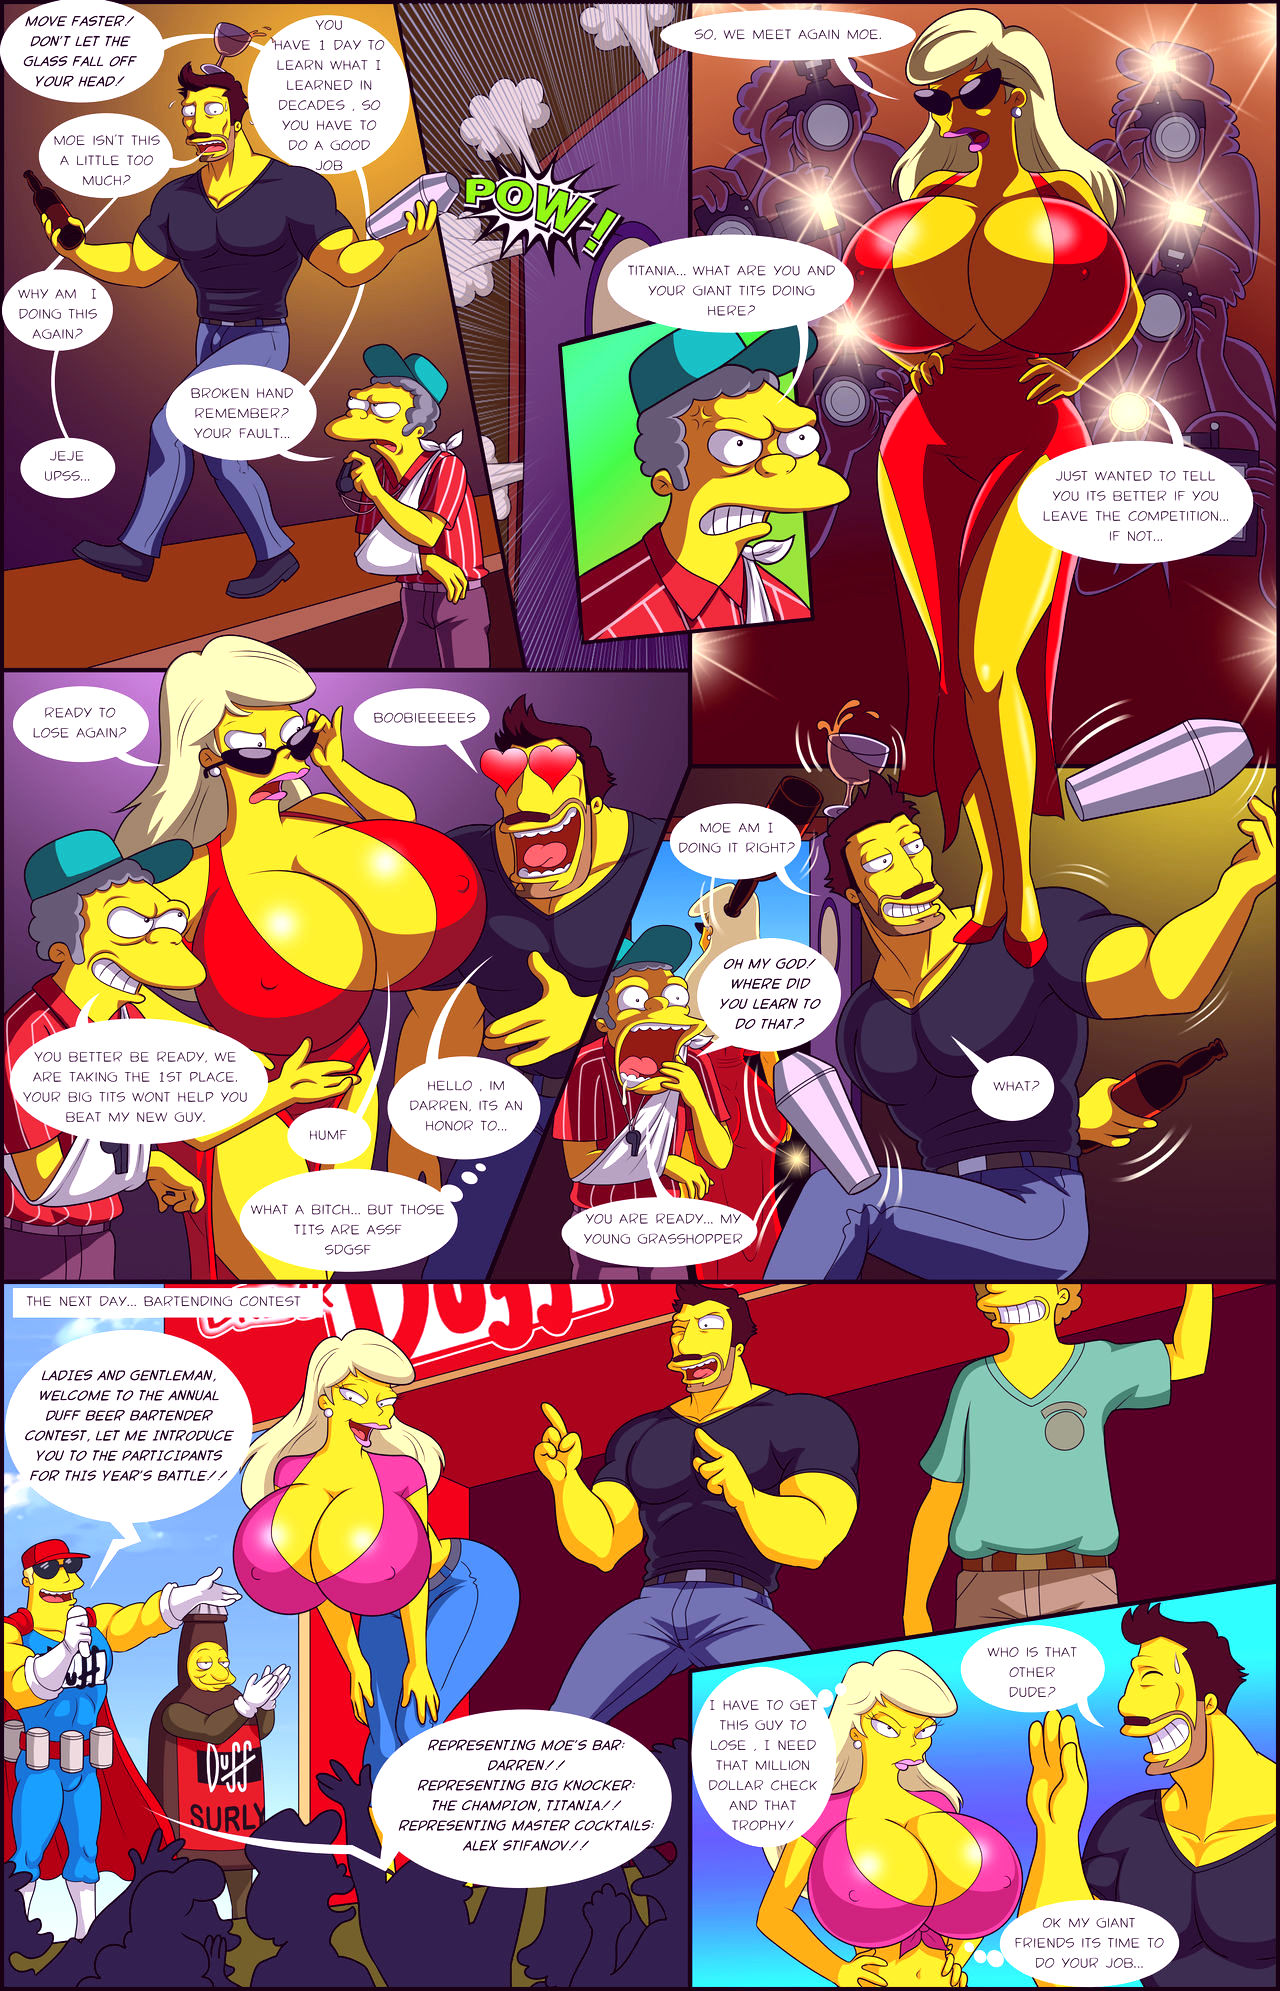 Darrens adventure or welcome to springfield porn comic picture 23